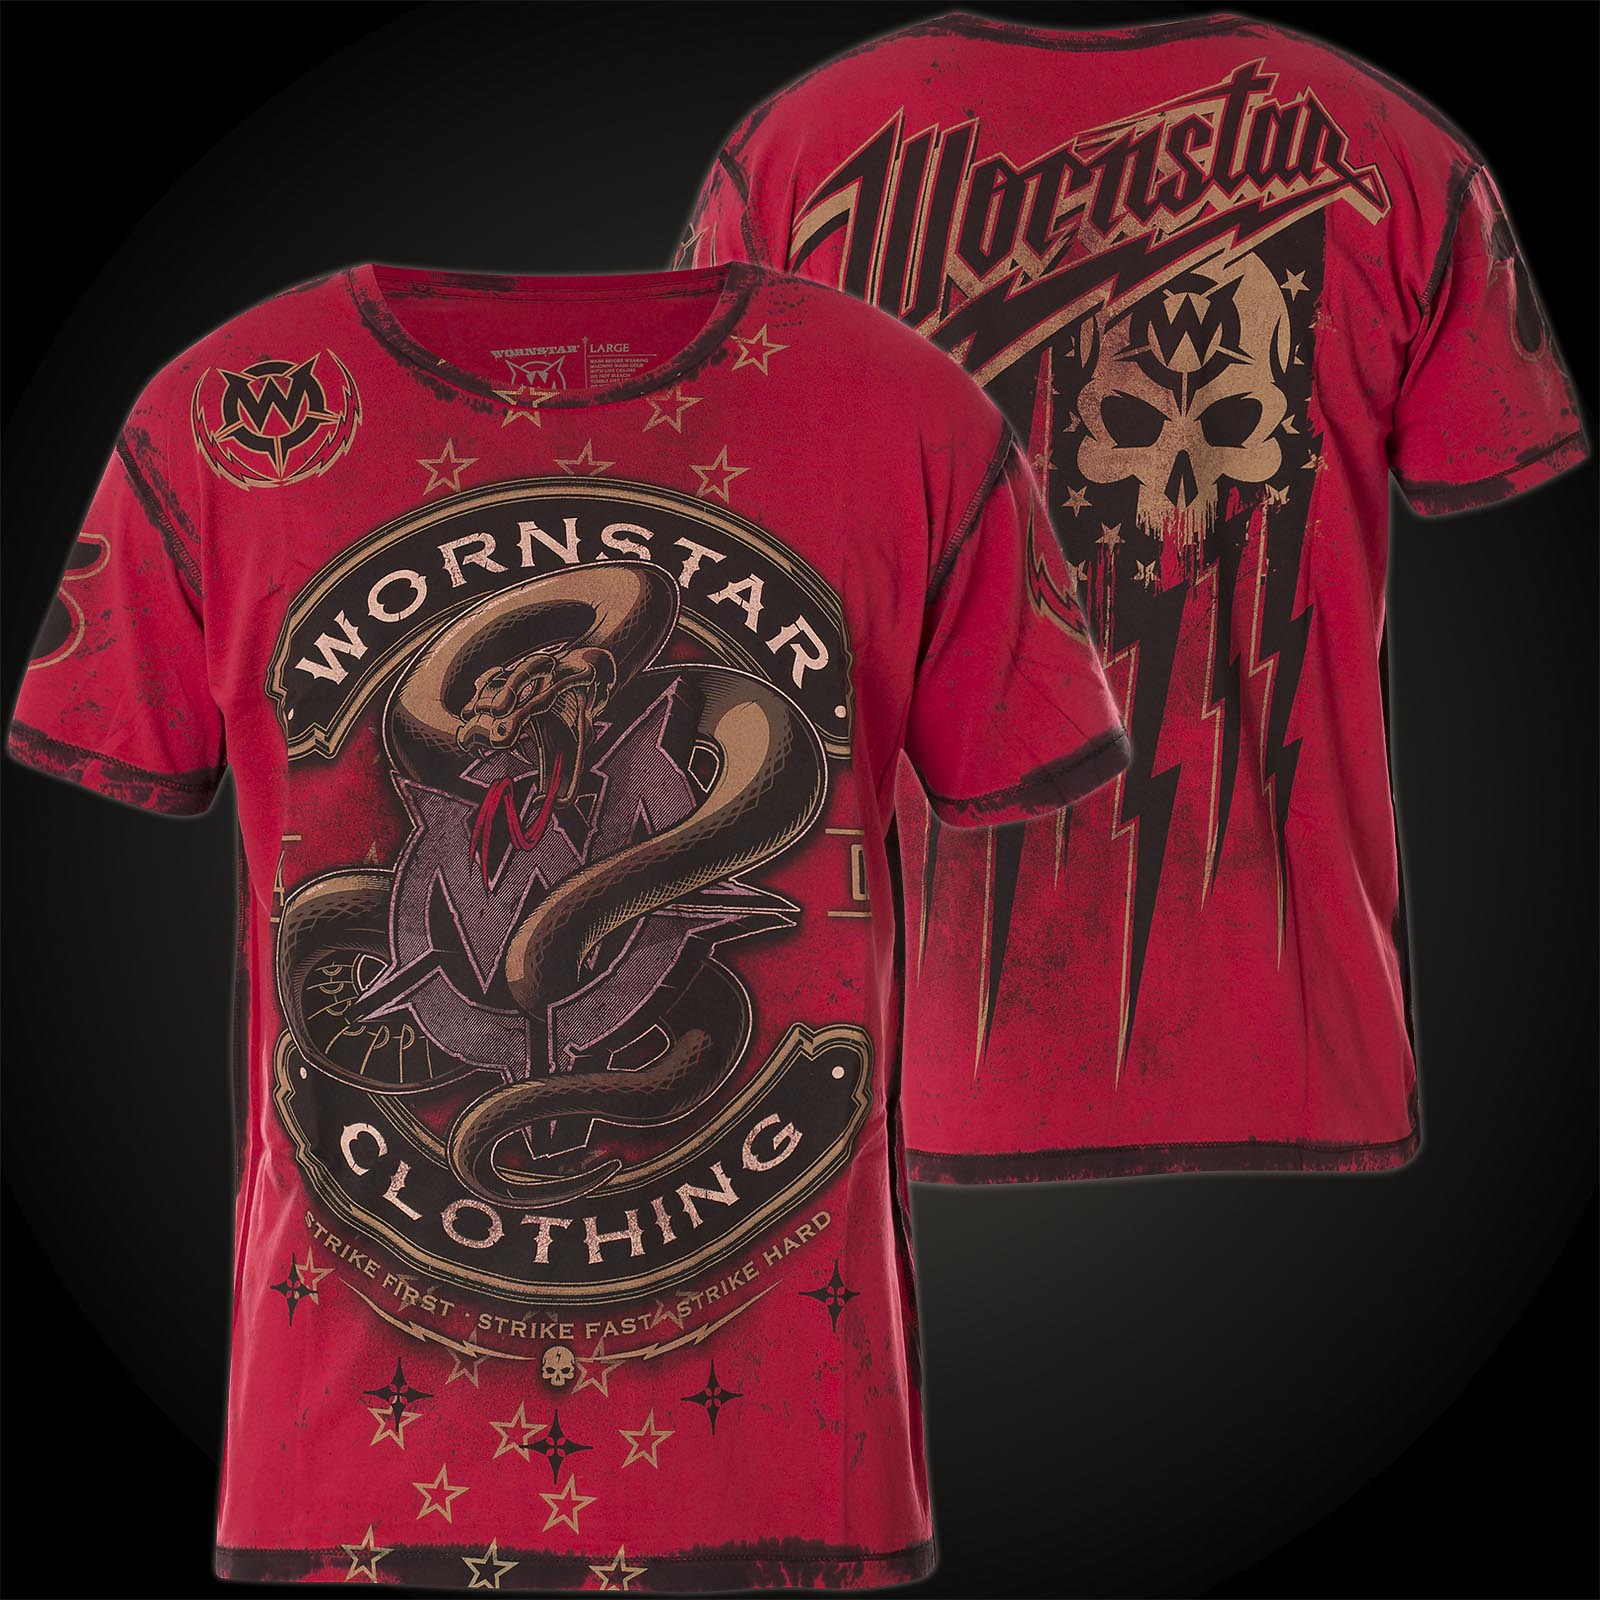 Wornstar T-Shirt Strike First in red with mineral washing.